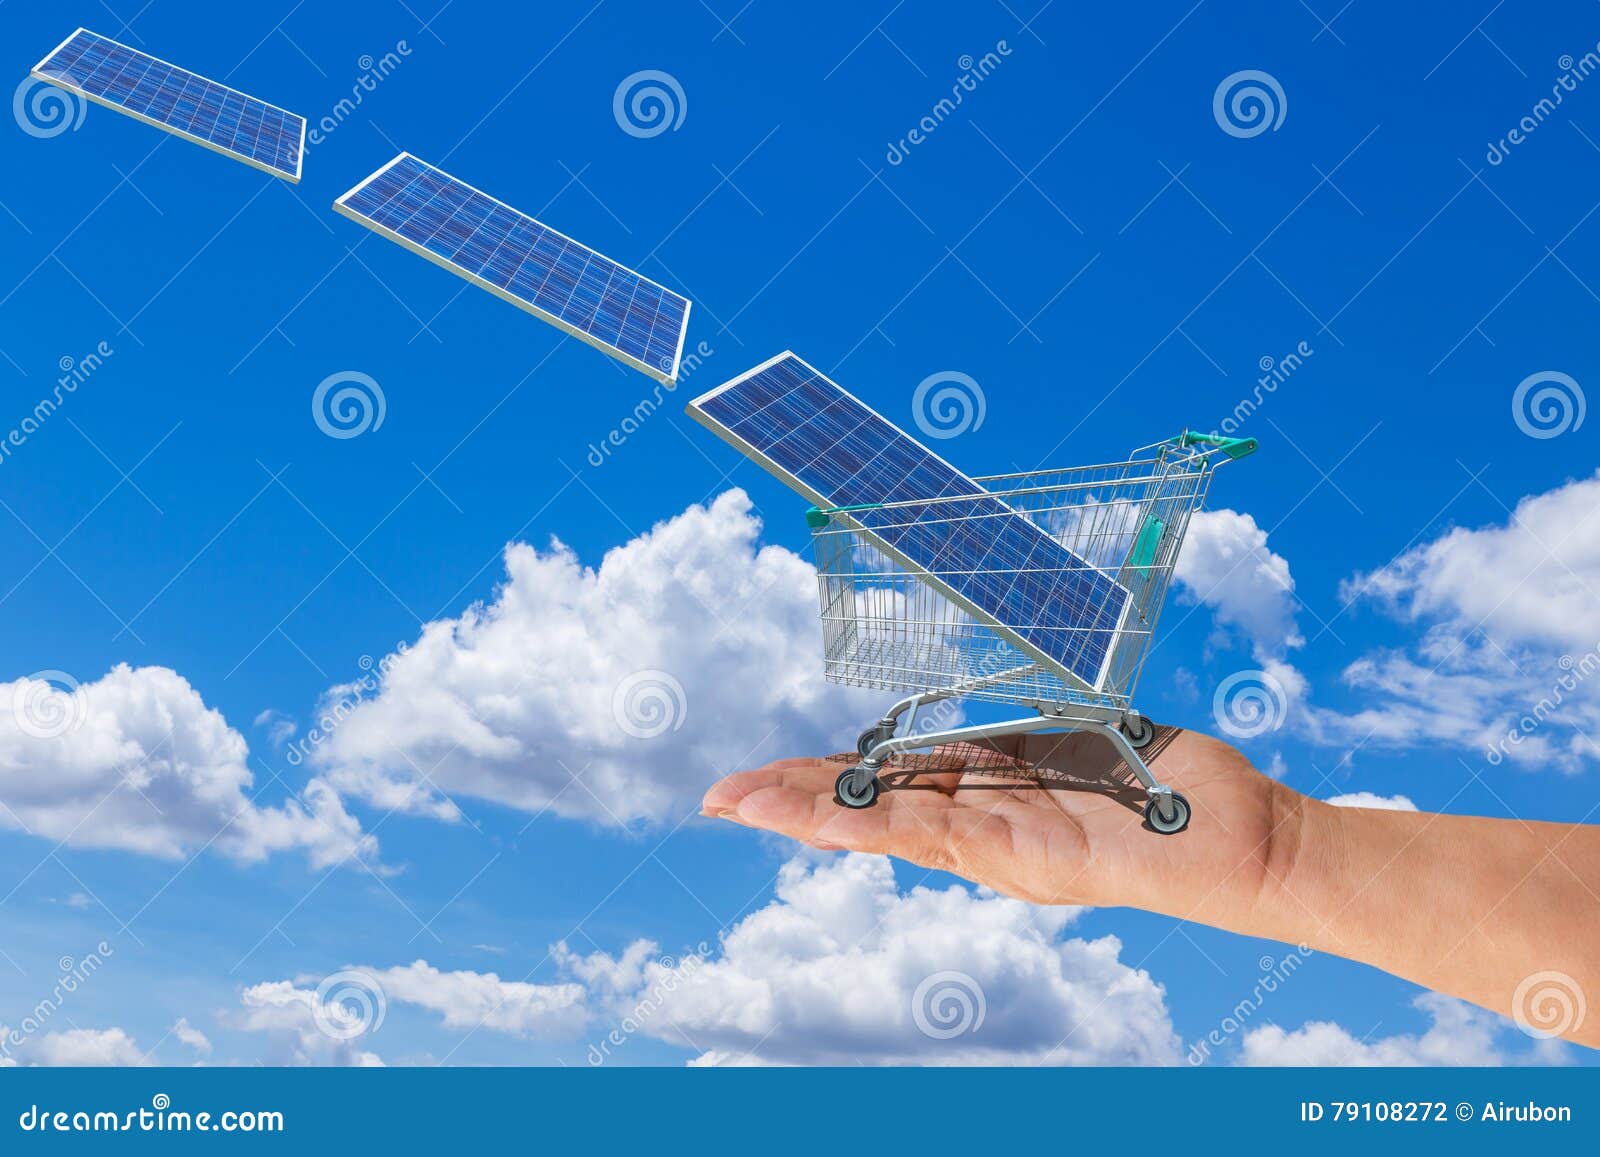 solar panel in shopping trolley cart on women hand with photovoltaics falling from sky.